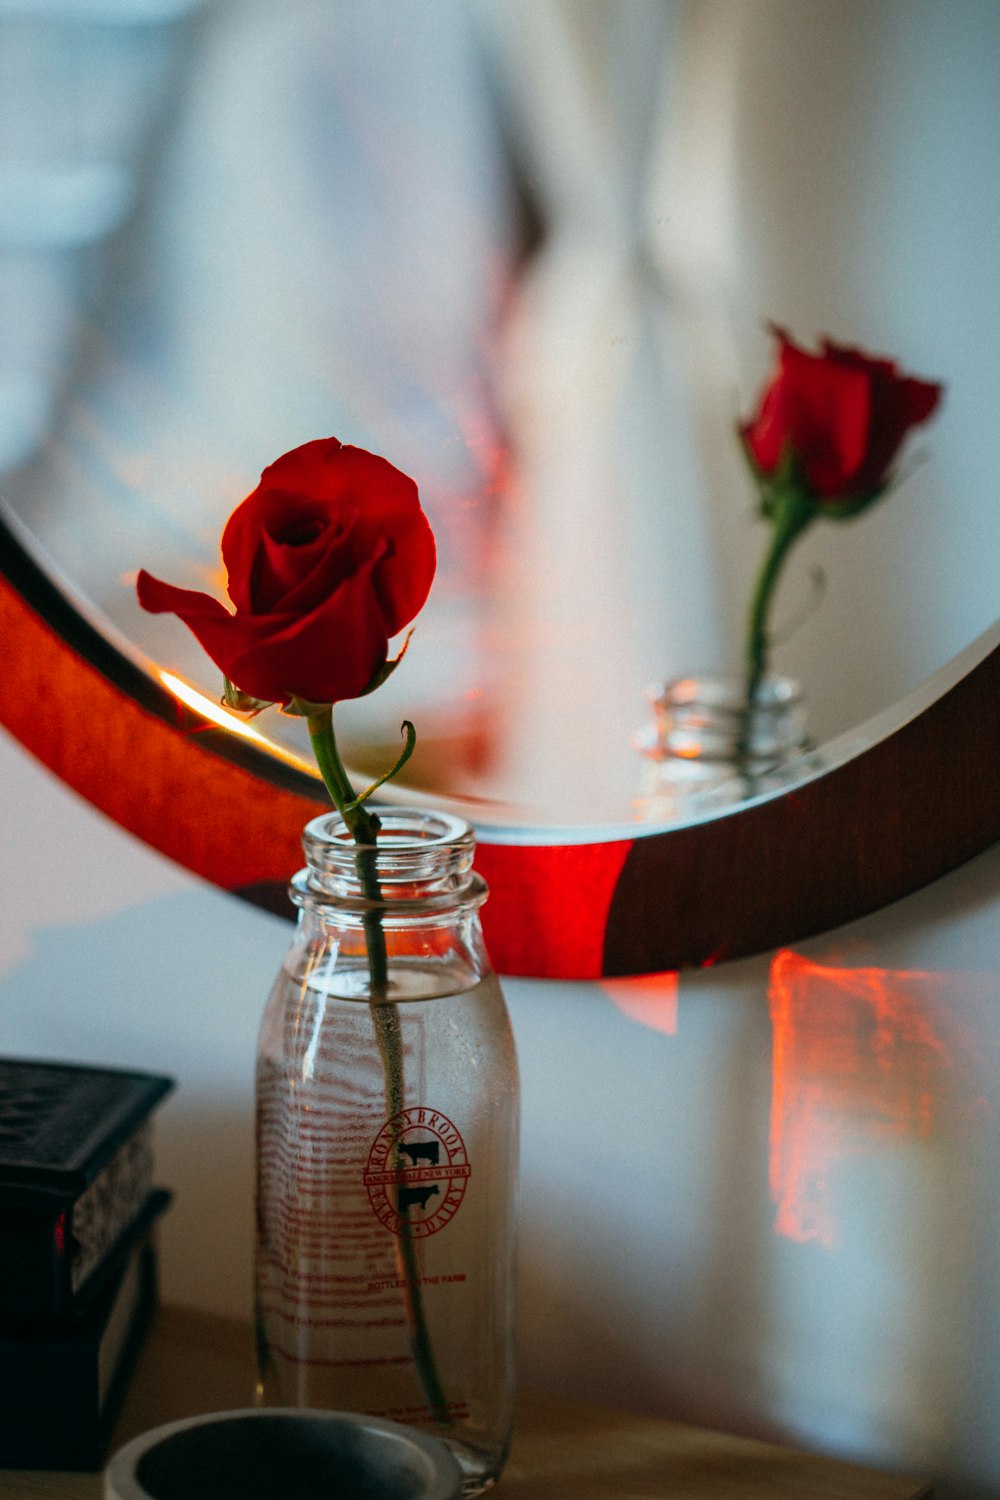 a single red rose sitting in a glass jar